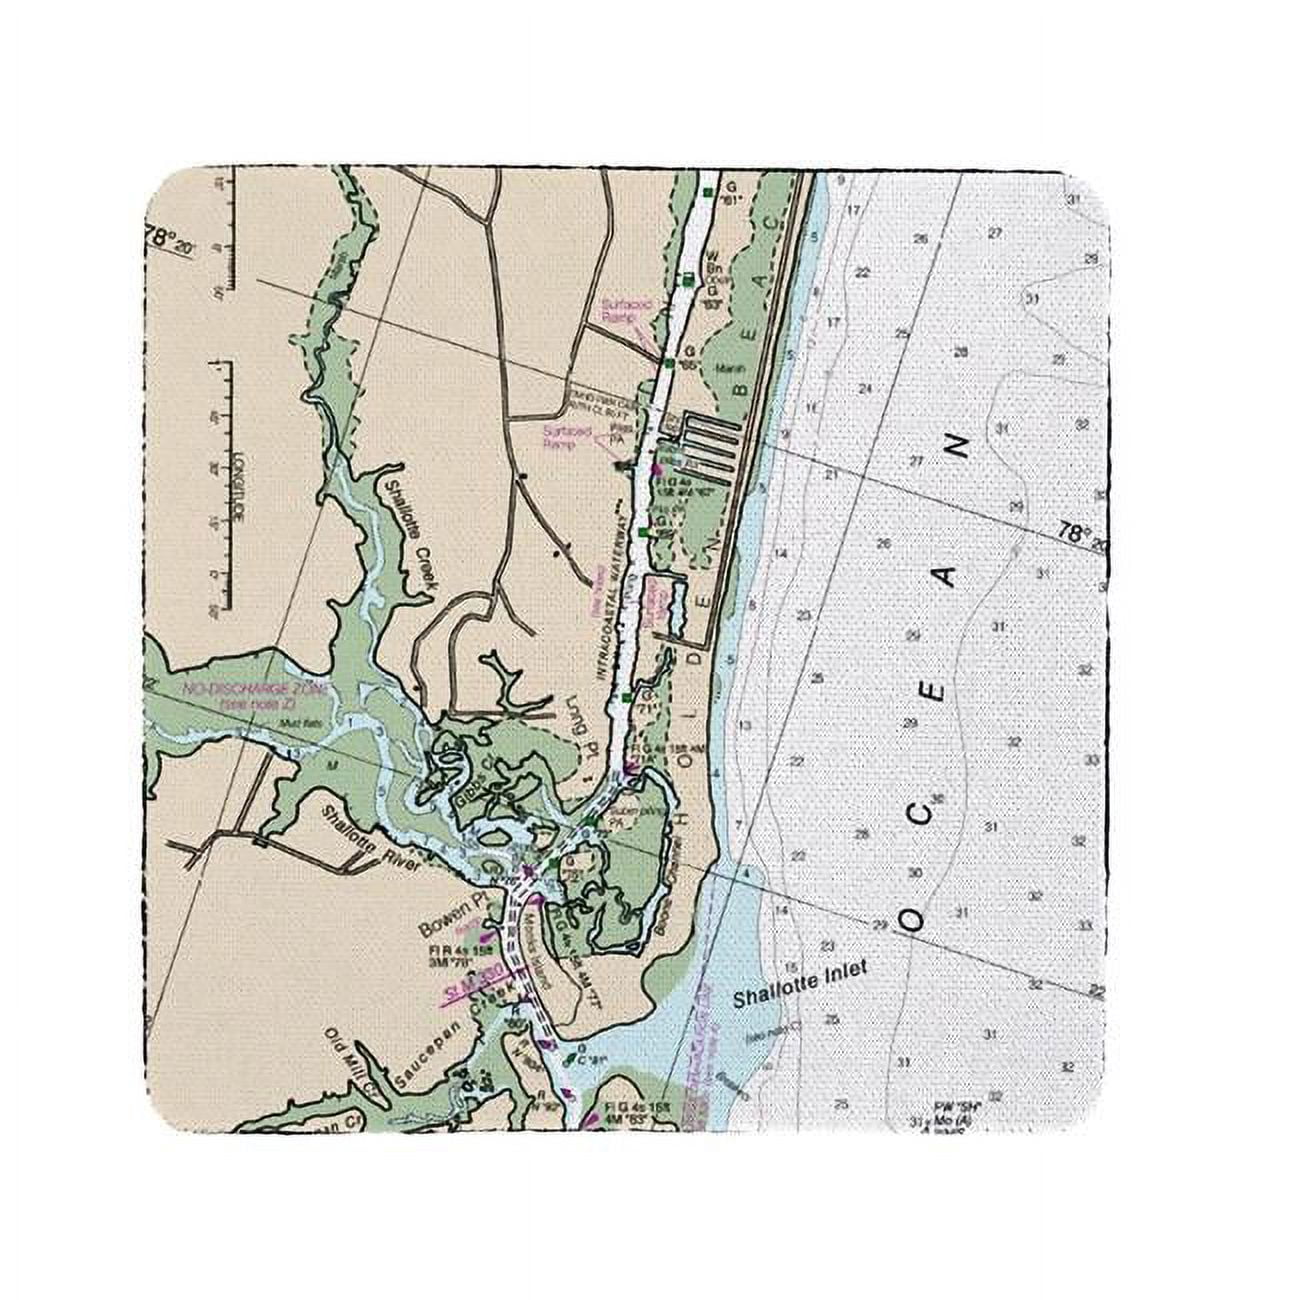 Ct11534hb 4 X 4 In. Holden Beach, Nc Nautical Map Coaster - Set Of 4